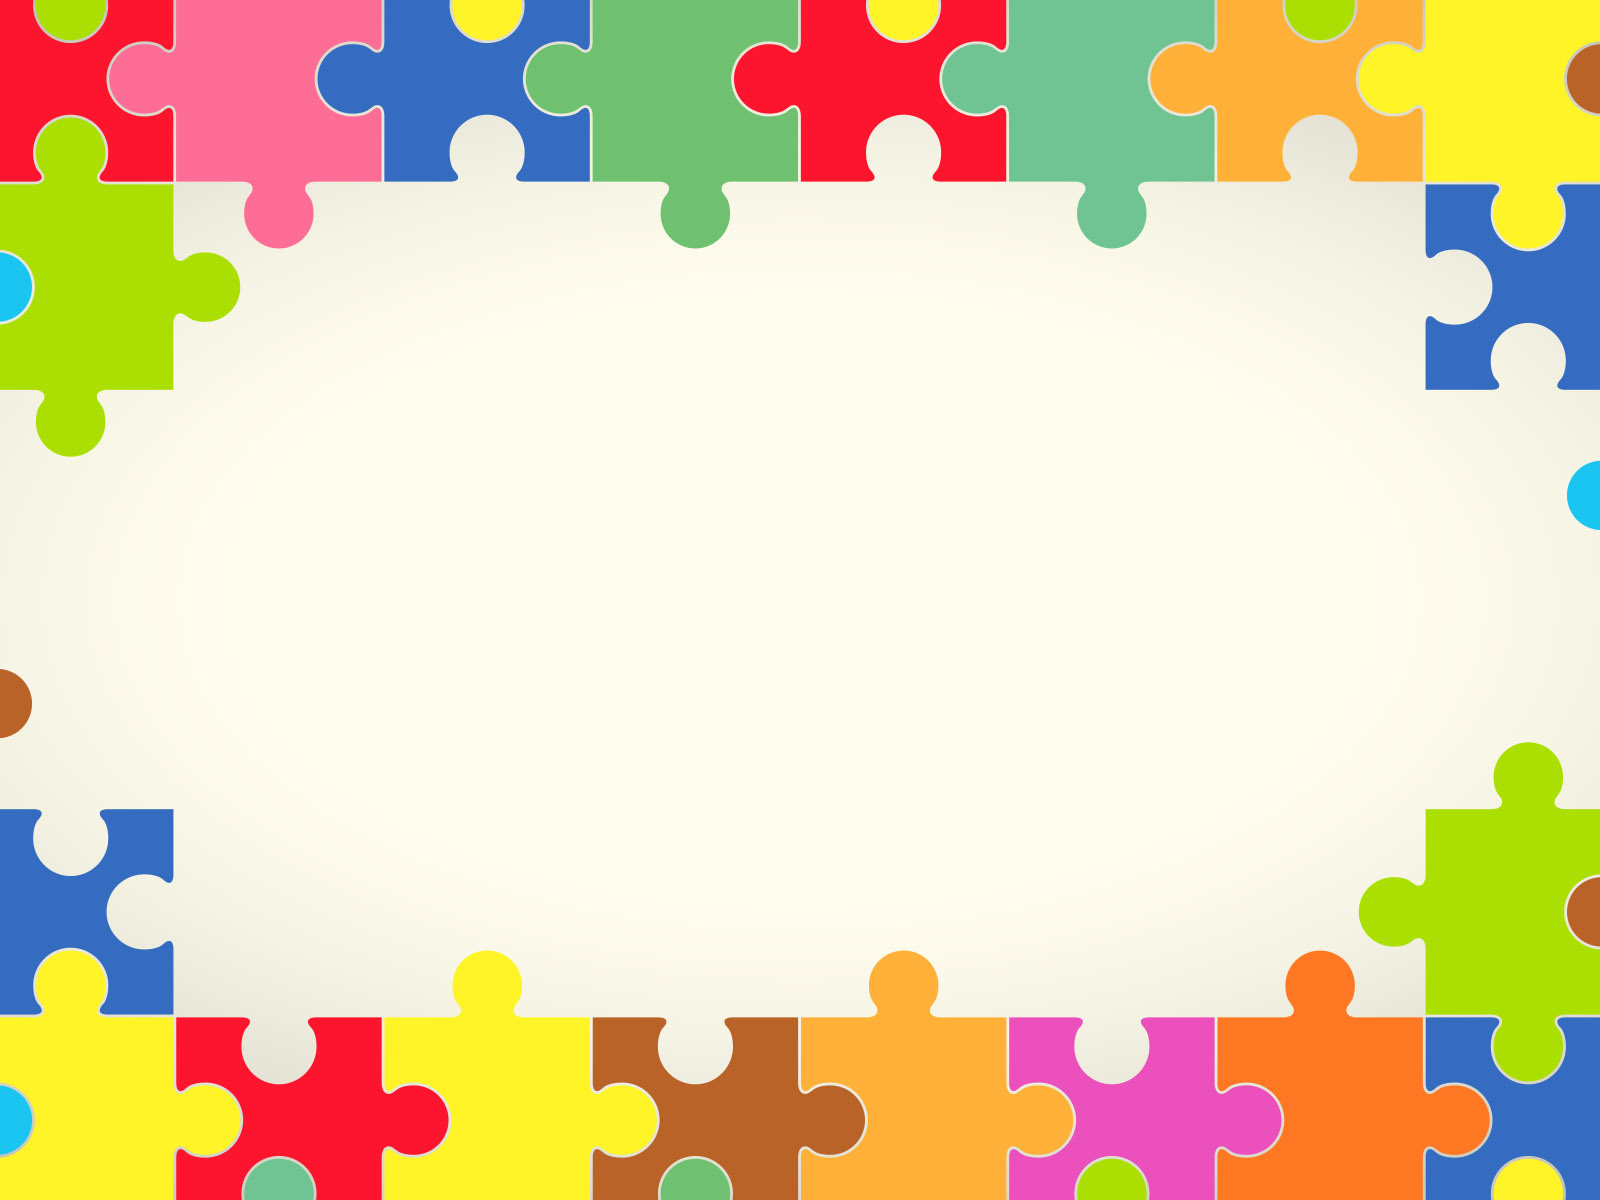 colourful-puzzles-powerpoint-templates-border-frames-objects-free-ppt-backgrounds-and